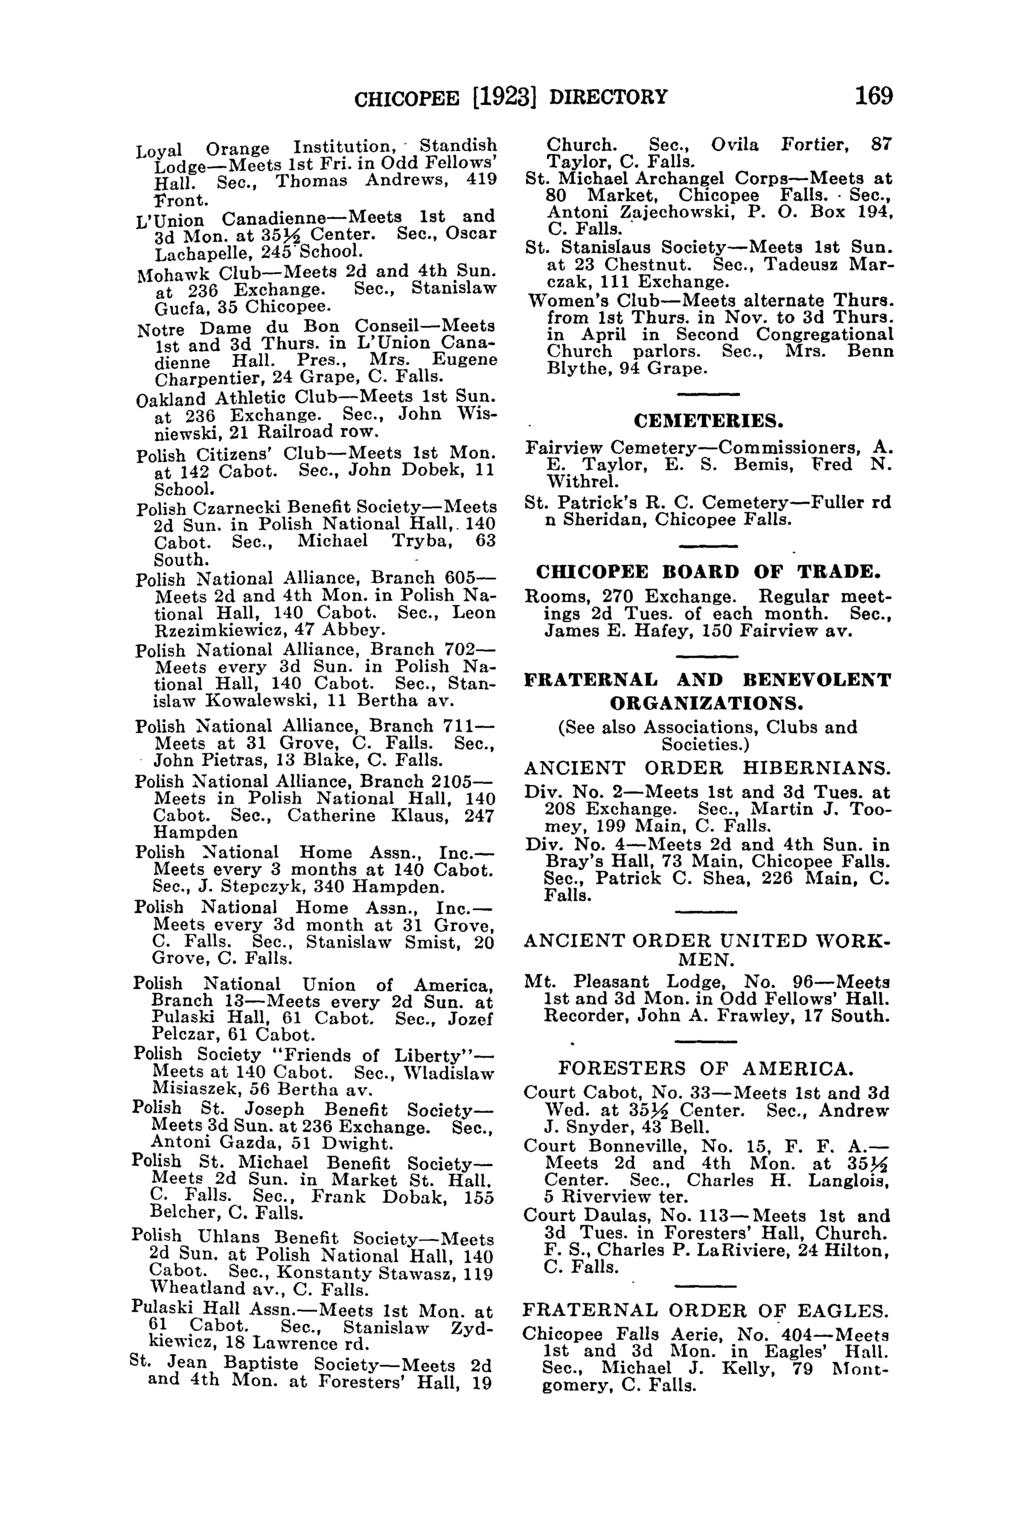 CHICOPEE [1923] DIRECTORY 169 Loyal Orange Institution, - Standish Lodge-Meets 1st Fri. in Odd Fellows' Hall. Sec., Thomas Andrews, 419 Front. L'Union Canadienne-Meets 1st and 3d Mon. at 35~ Center.